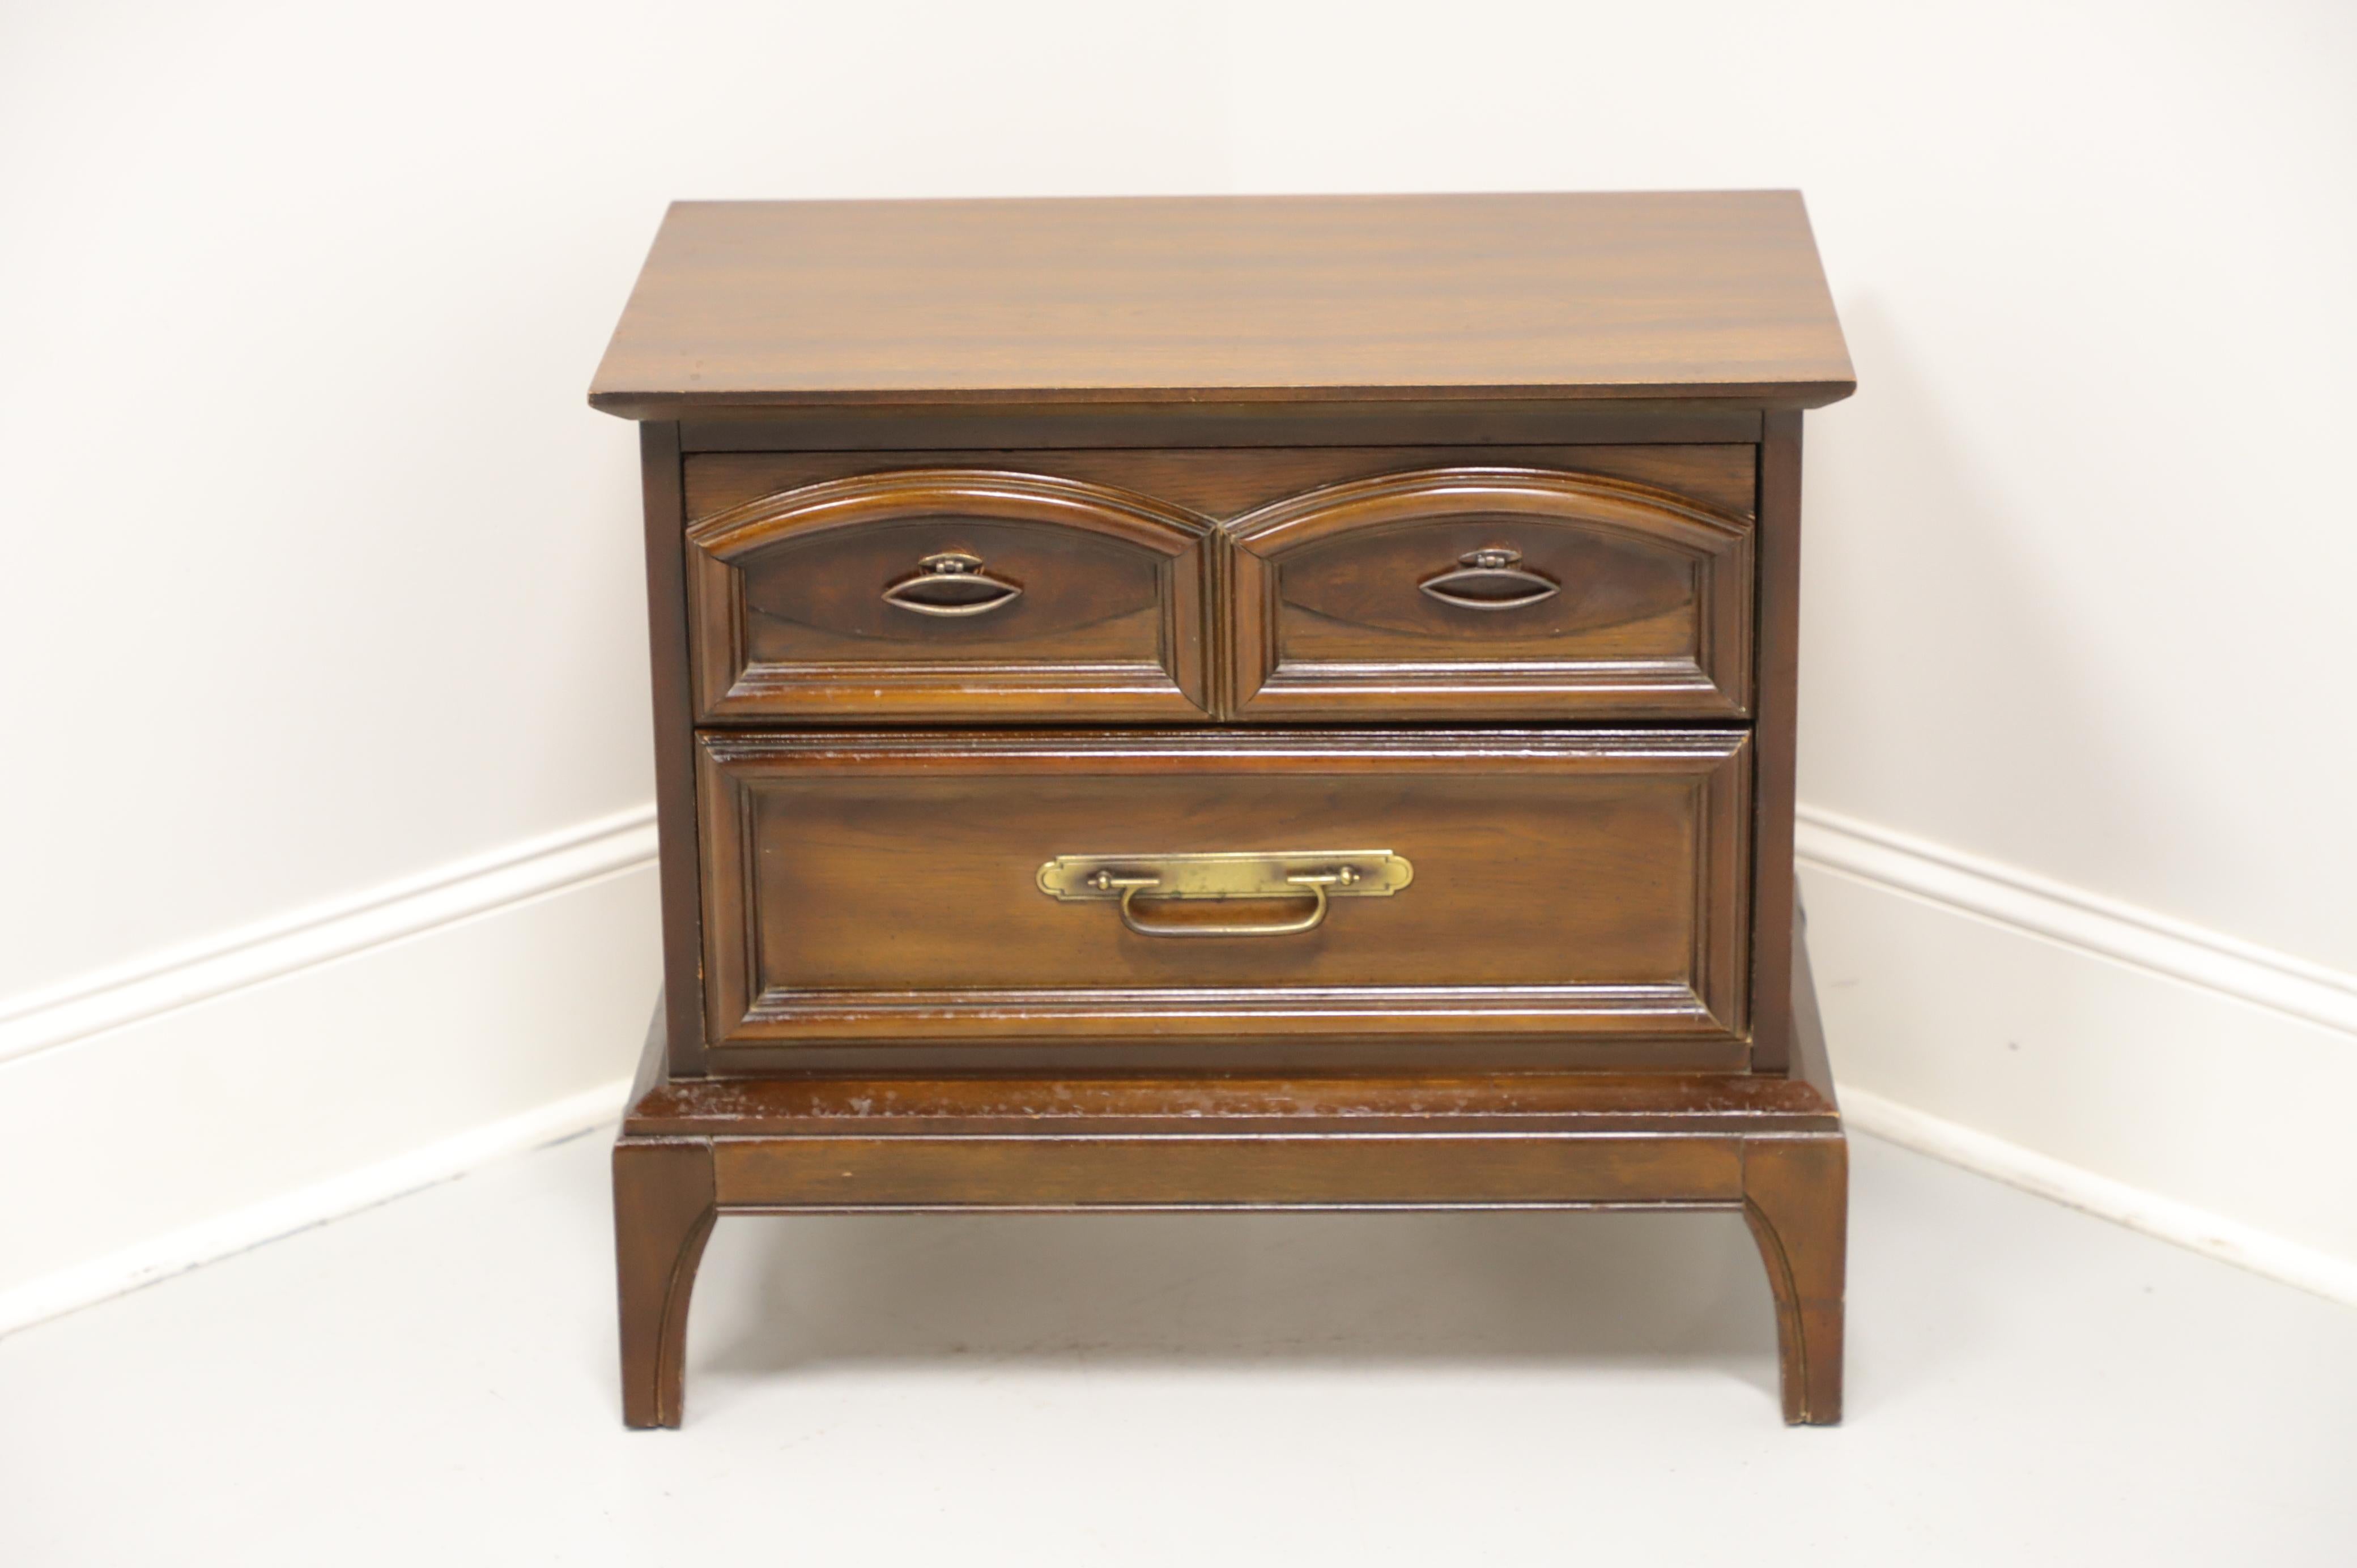 An Asian influenced Mid-Century nightstand, unbranded, similar quality to Thomasville. Walnut with brass hardware, burl accent to top drawer and splayed feet. Features two drawers of dovetail construction. Made in the USA, in the mid 20th